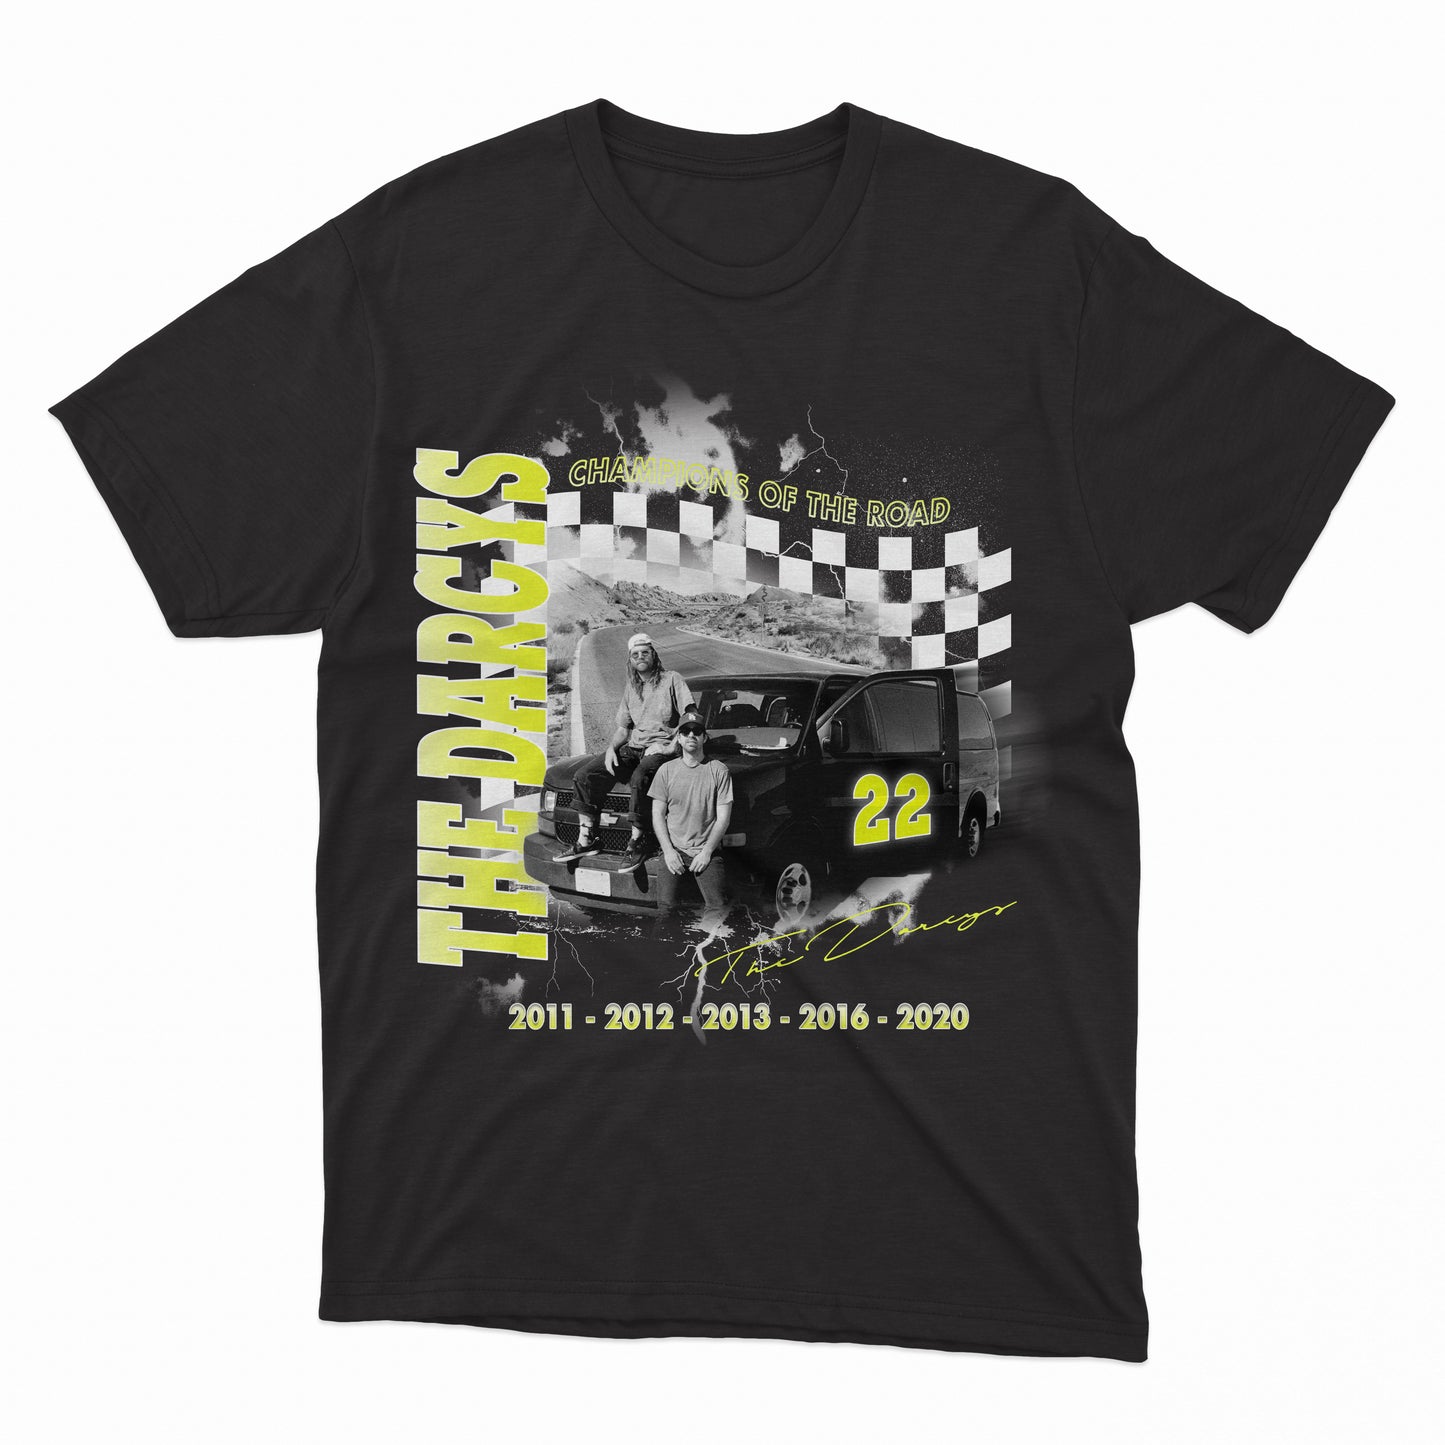 Champions of the Road Tee